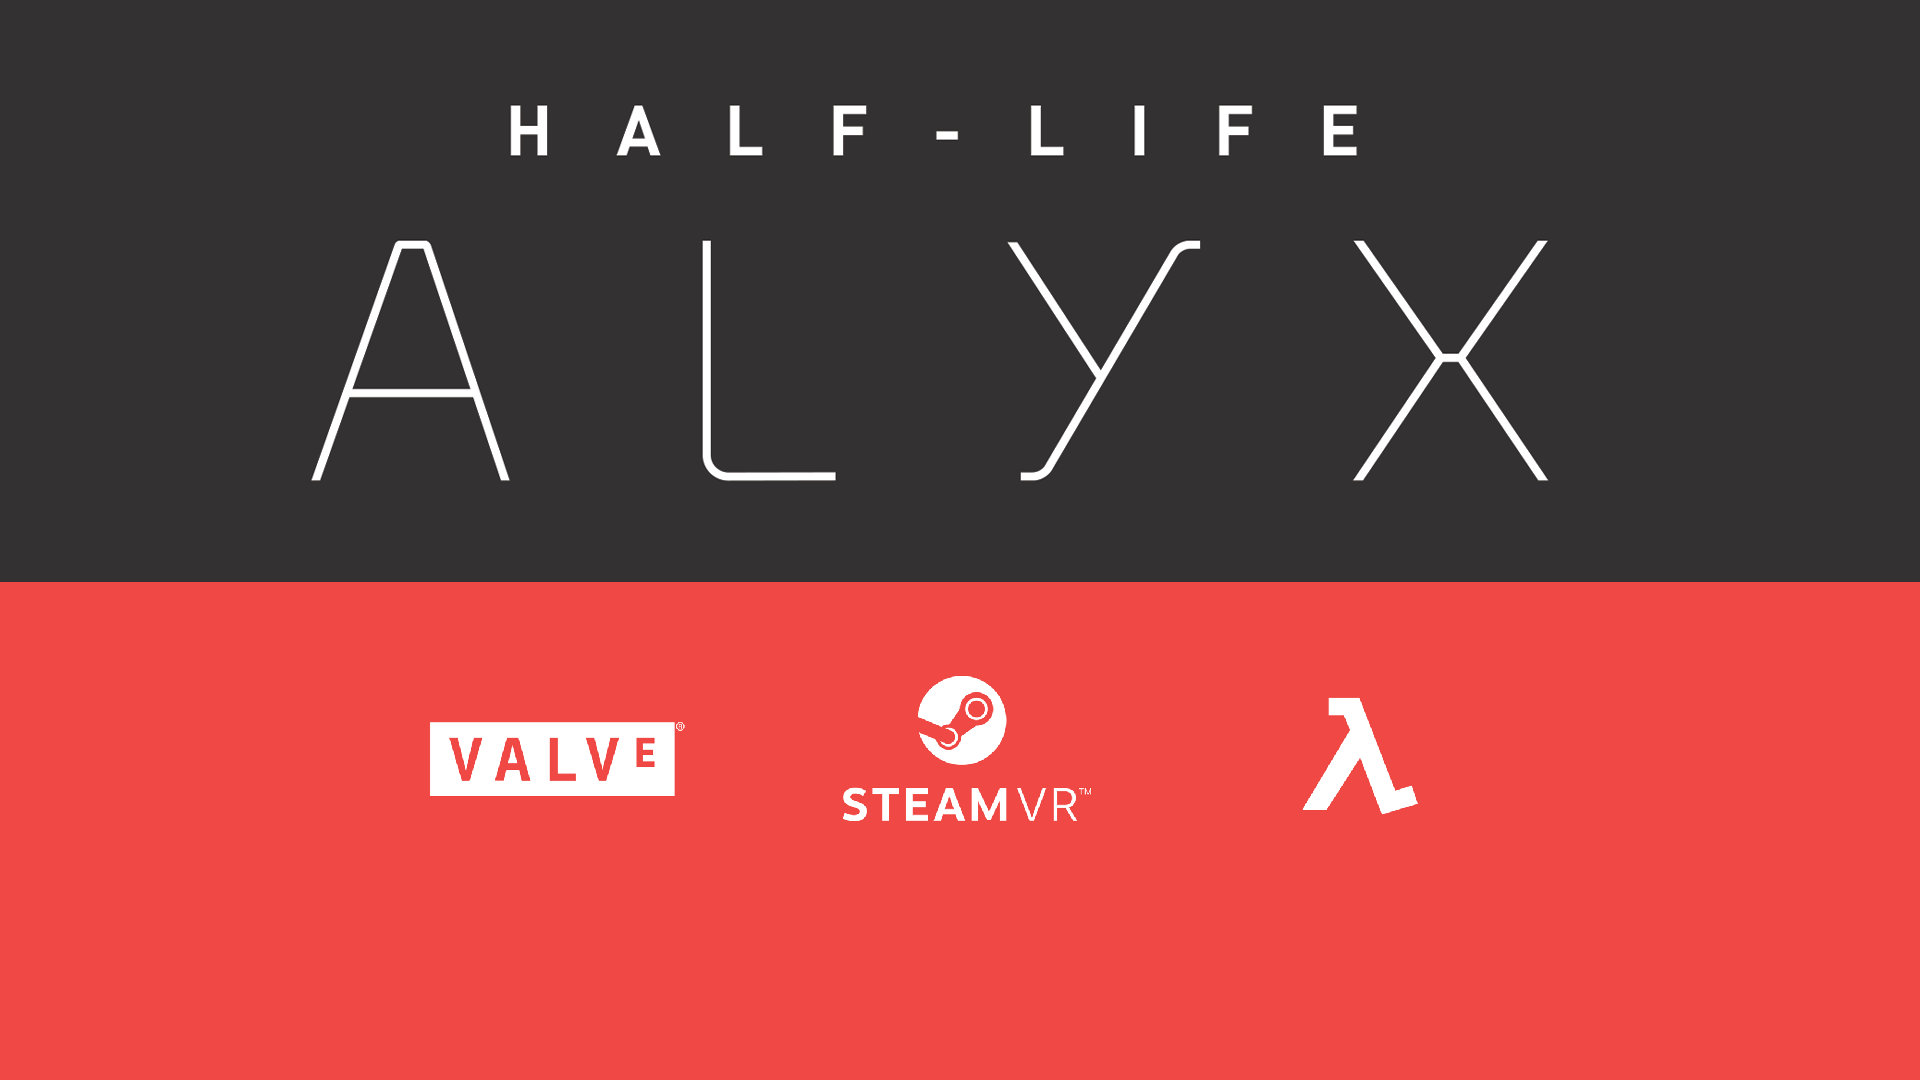 Play Half Life Alyx on Oculus Quest 2 and other SteamVR games